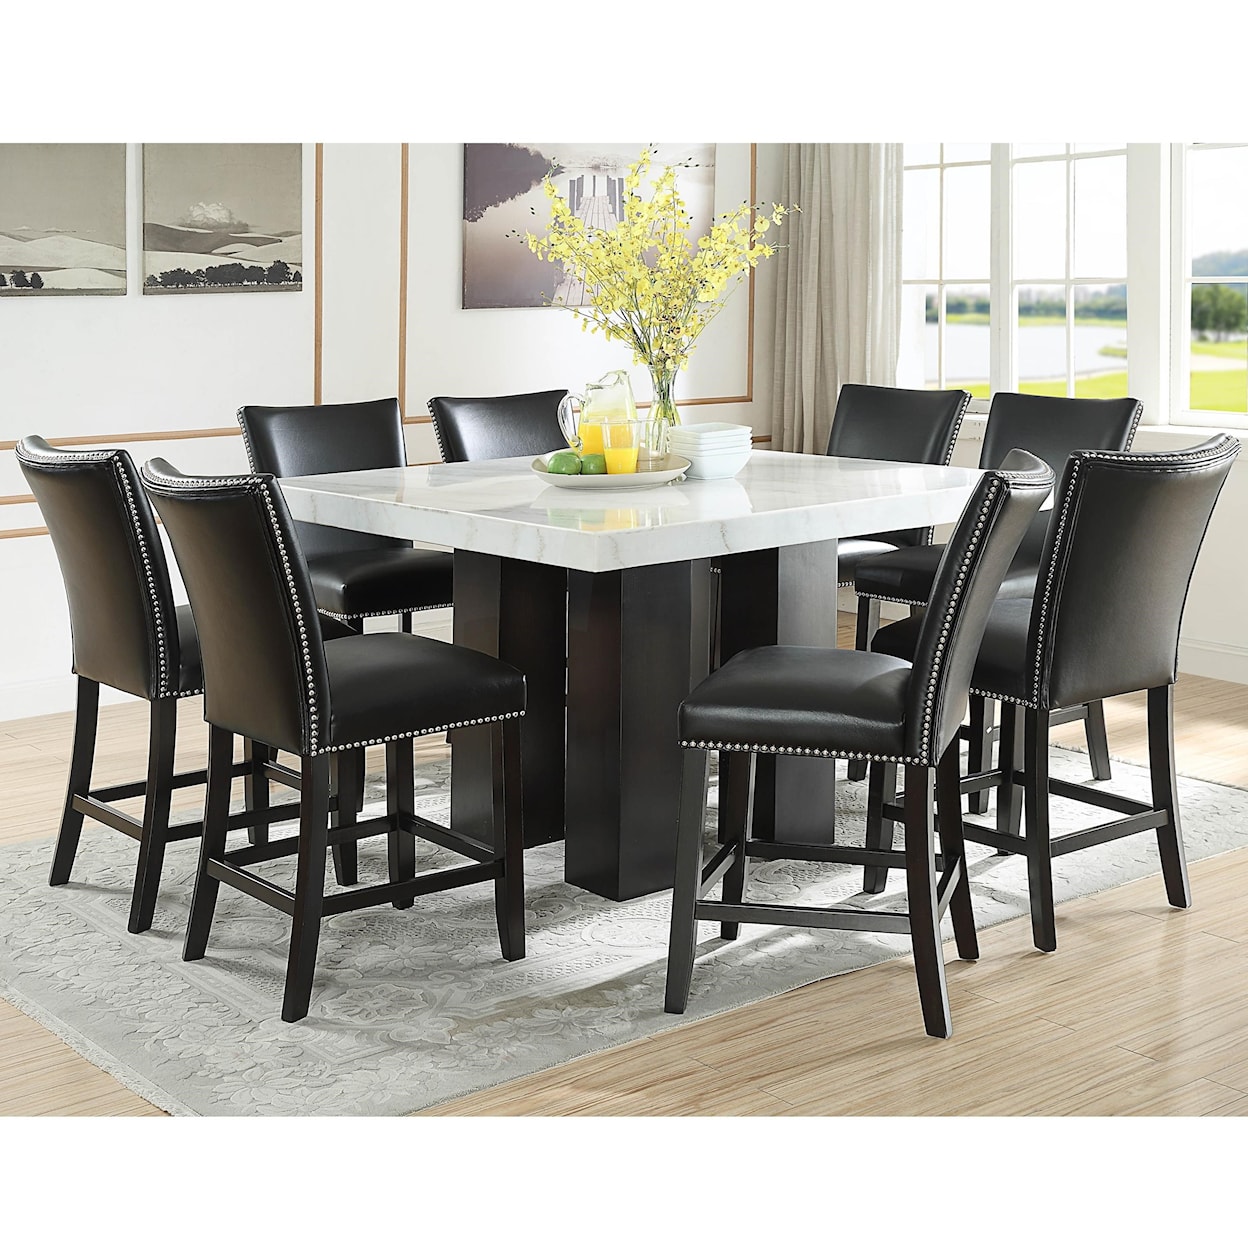 Prime Camila 9 Piece Counter Height Dining Set